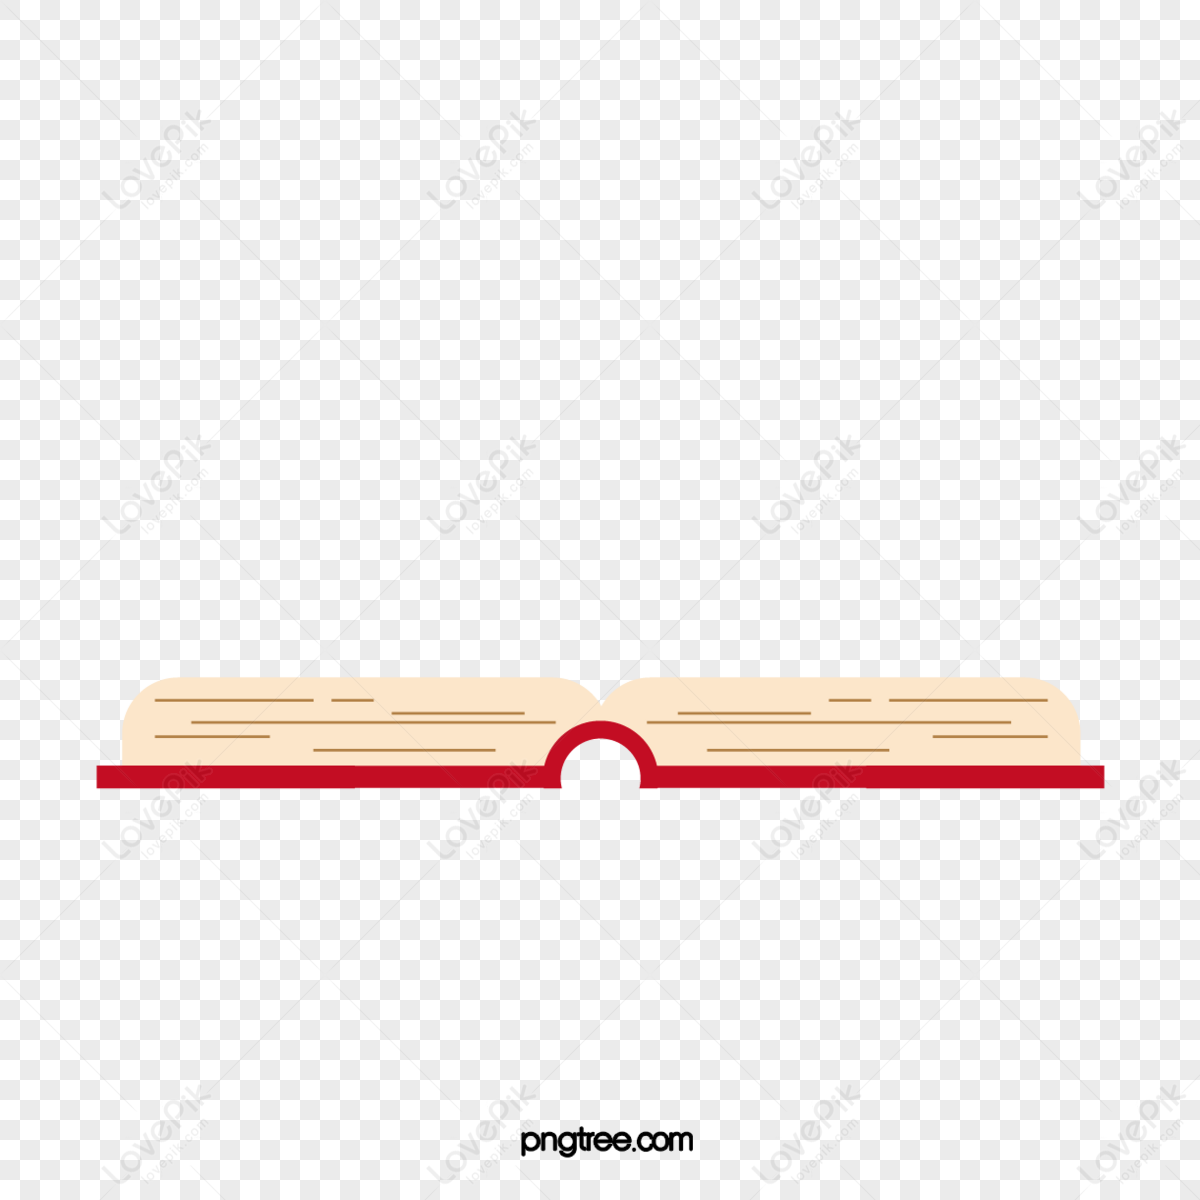 Office stationery books books cartoon stationery,color stationery,office supplies png hd transparent image